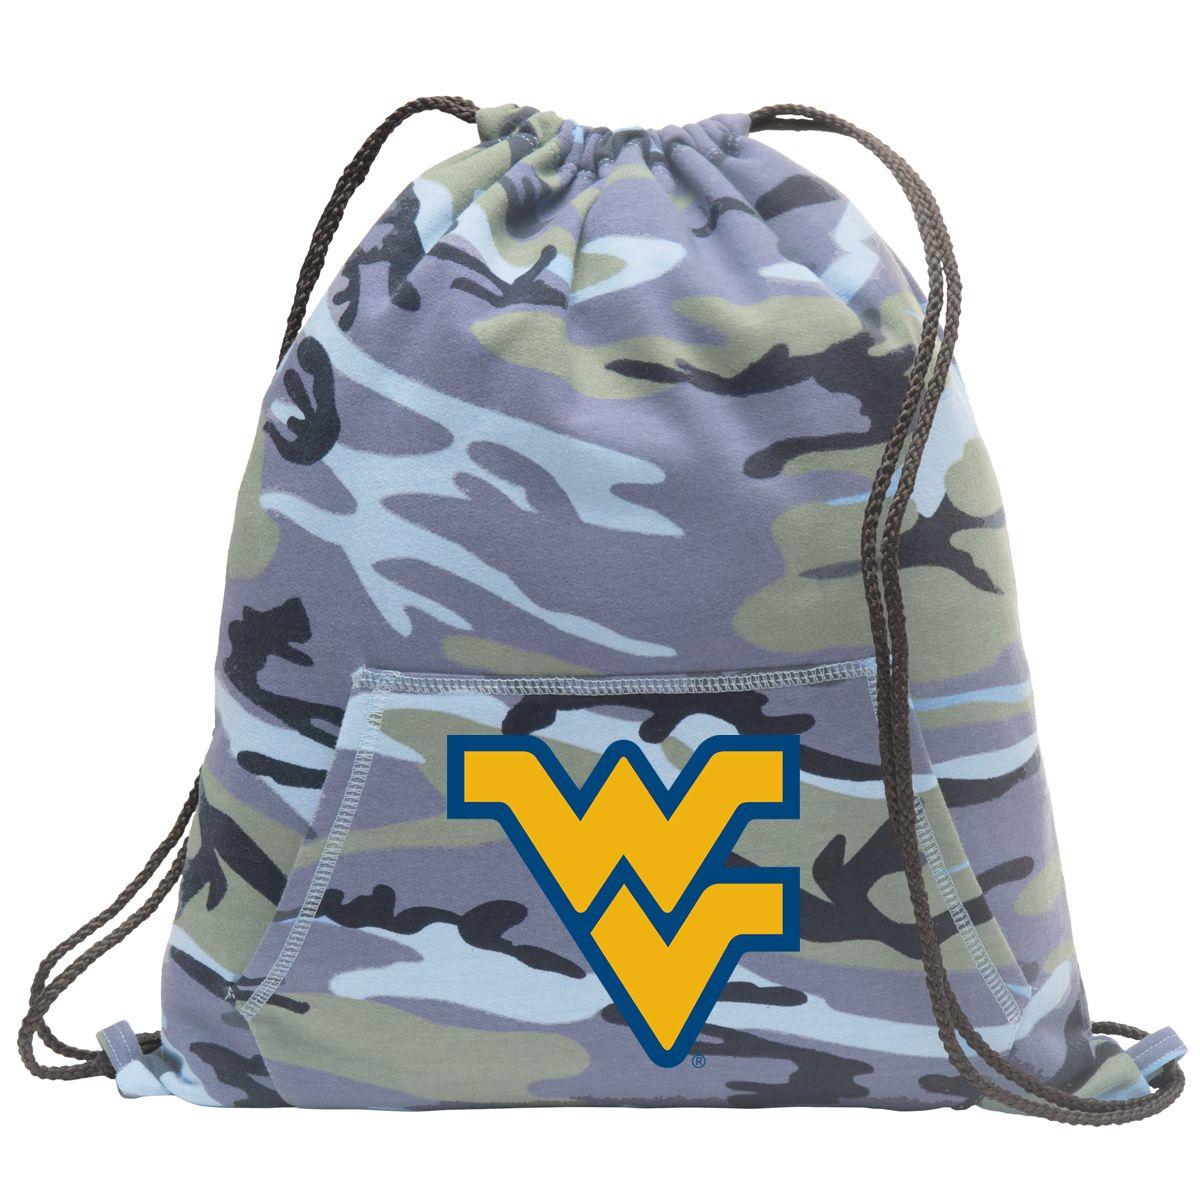 Cool WV Logo - Details about West Virginia University Drawstring Backpack COOL CAMO WVU  Cinch Pack